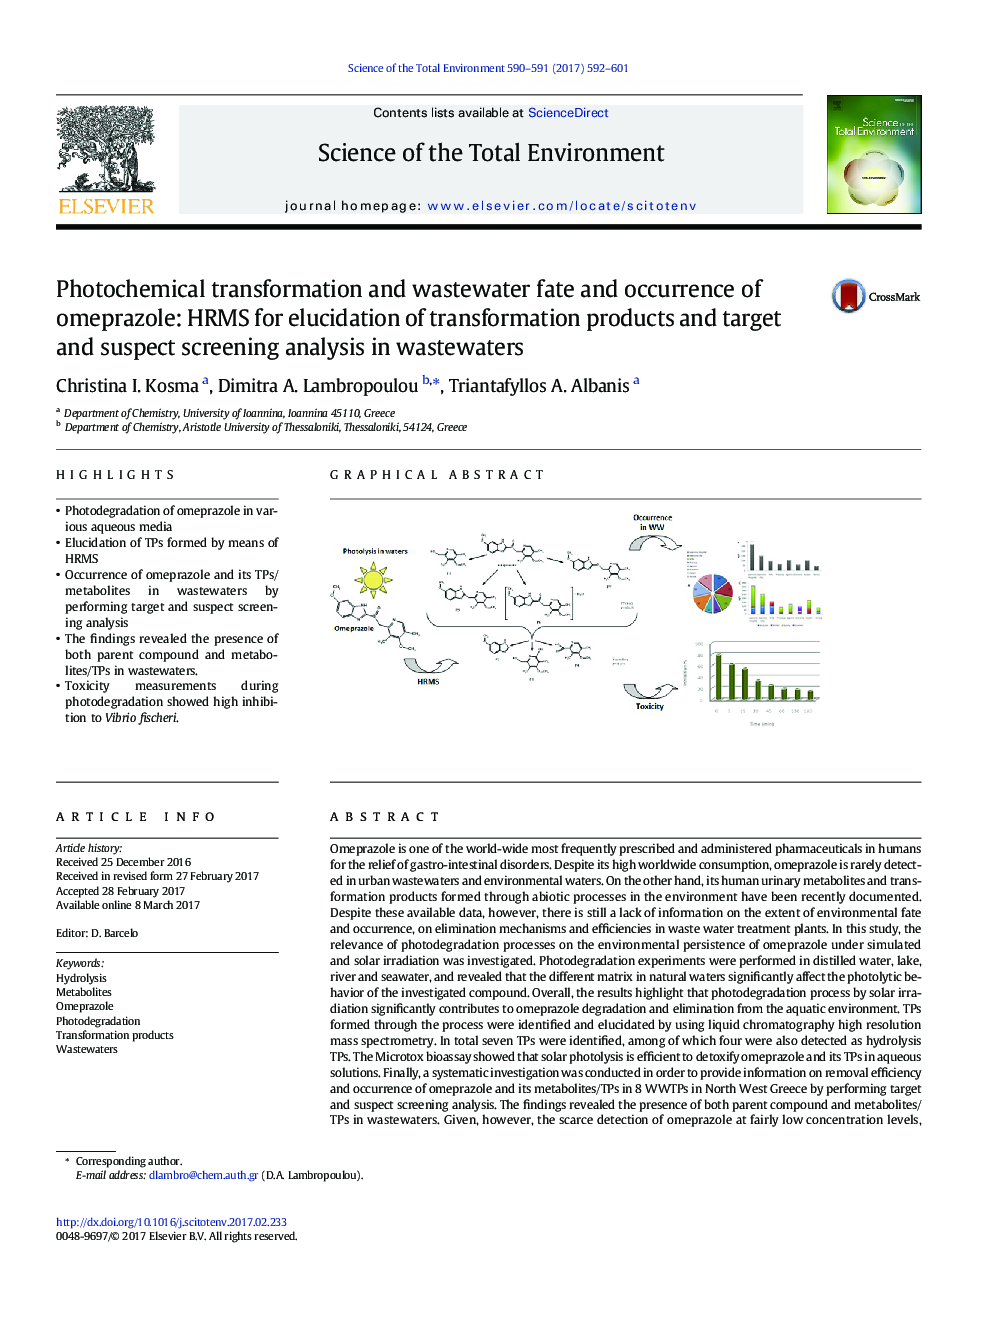 Photochemical transformation and wastewater fate and occurrence of omeprazole: HRMS for elucidation of transformation products and target and suspect screening analysis in wastewaters